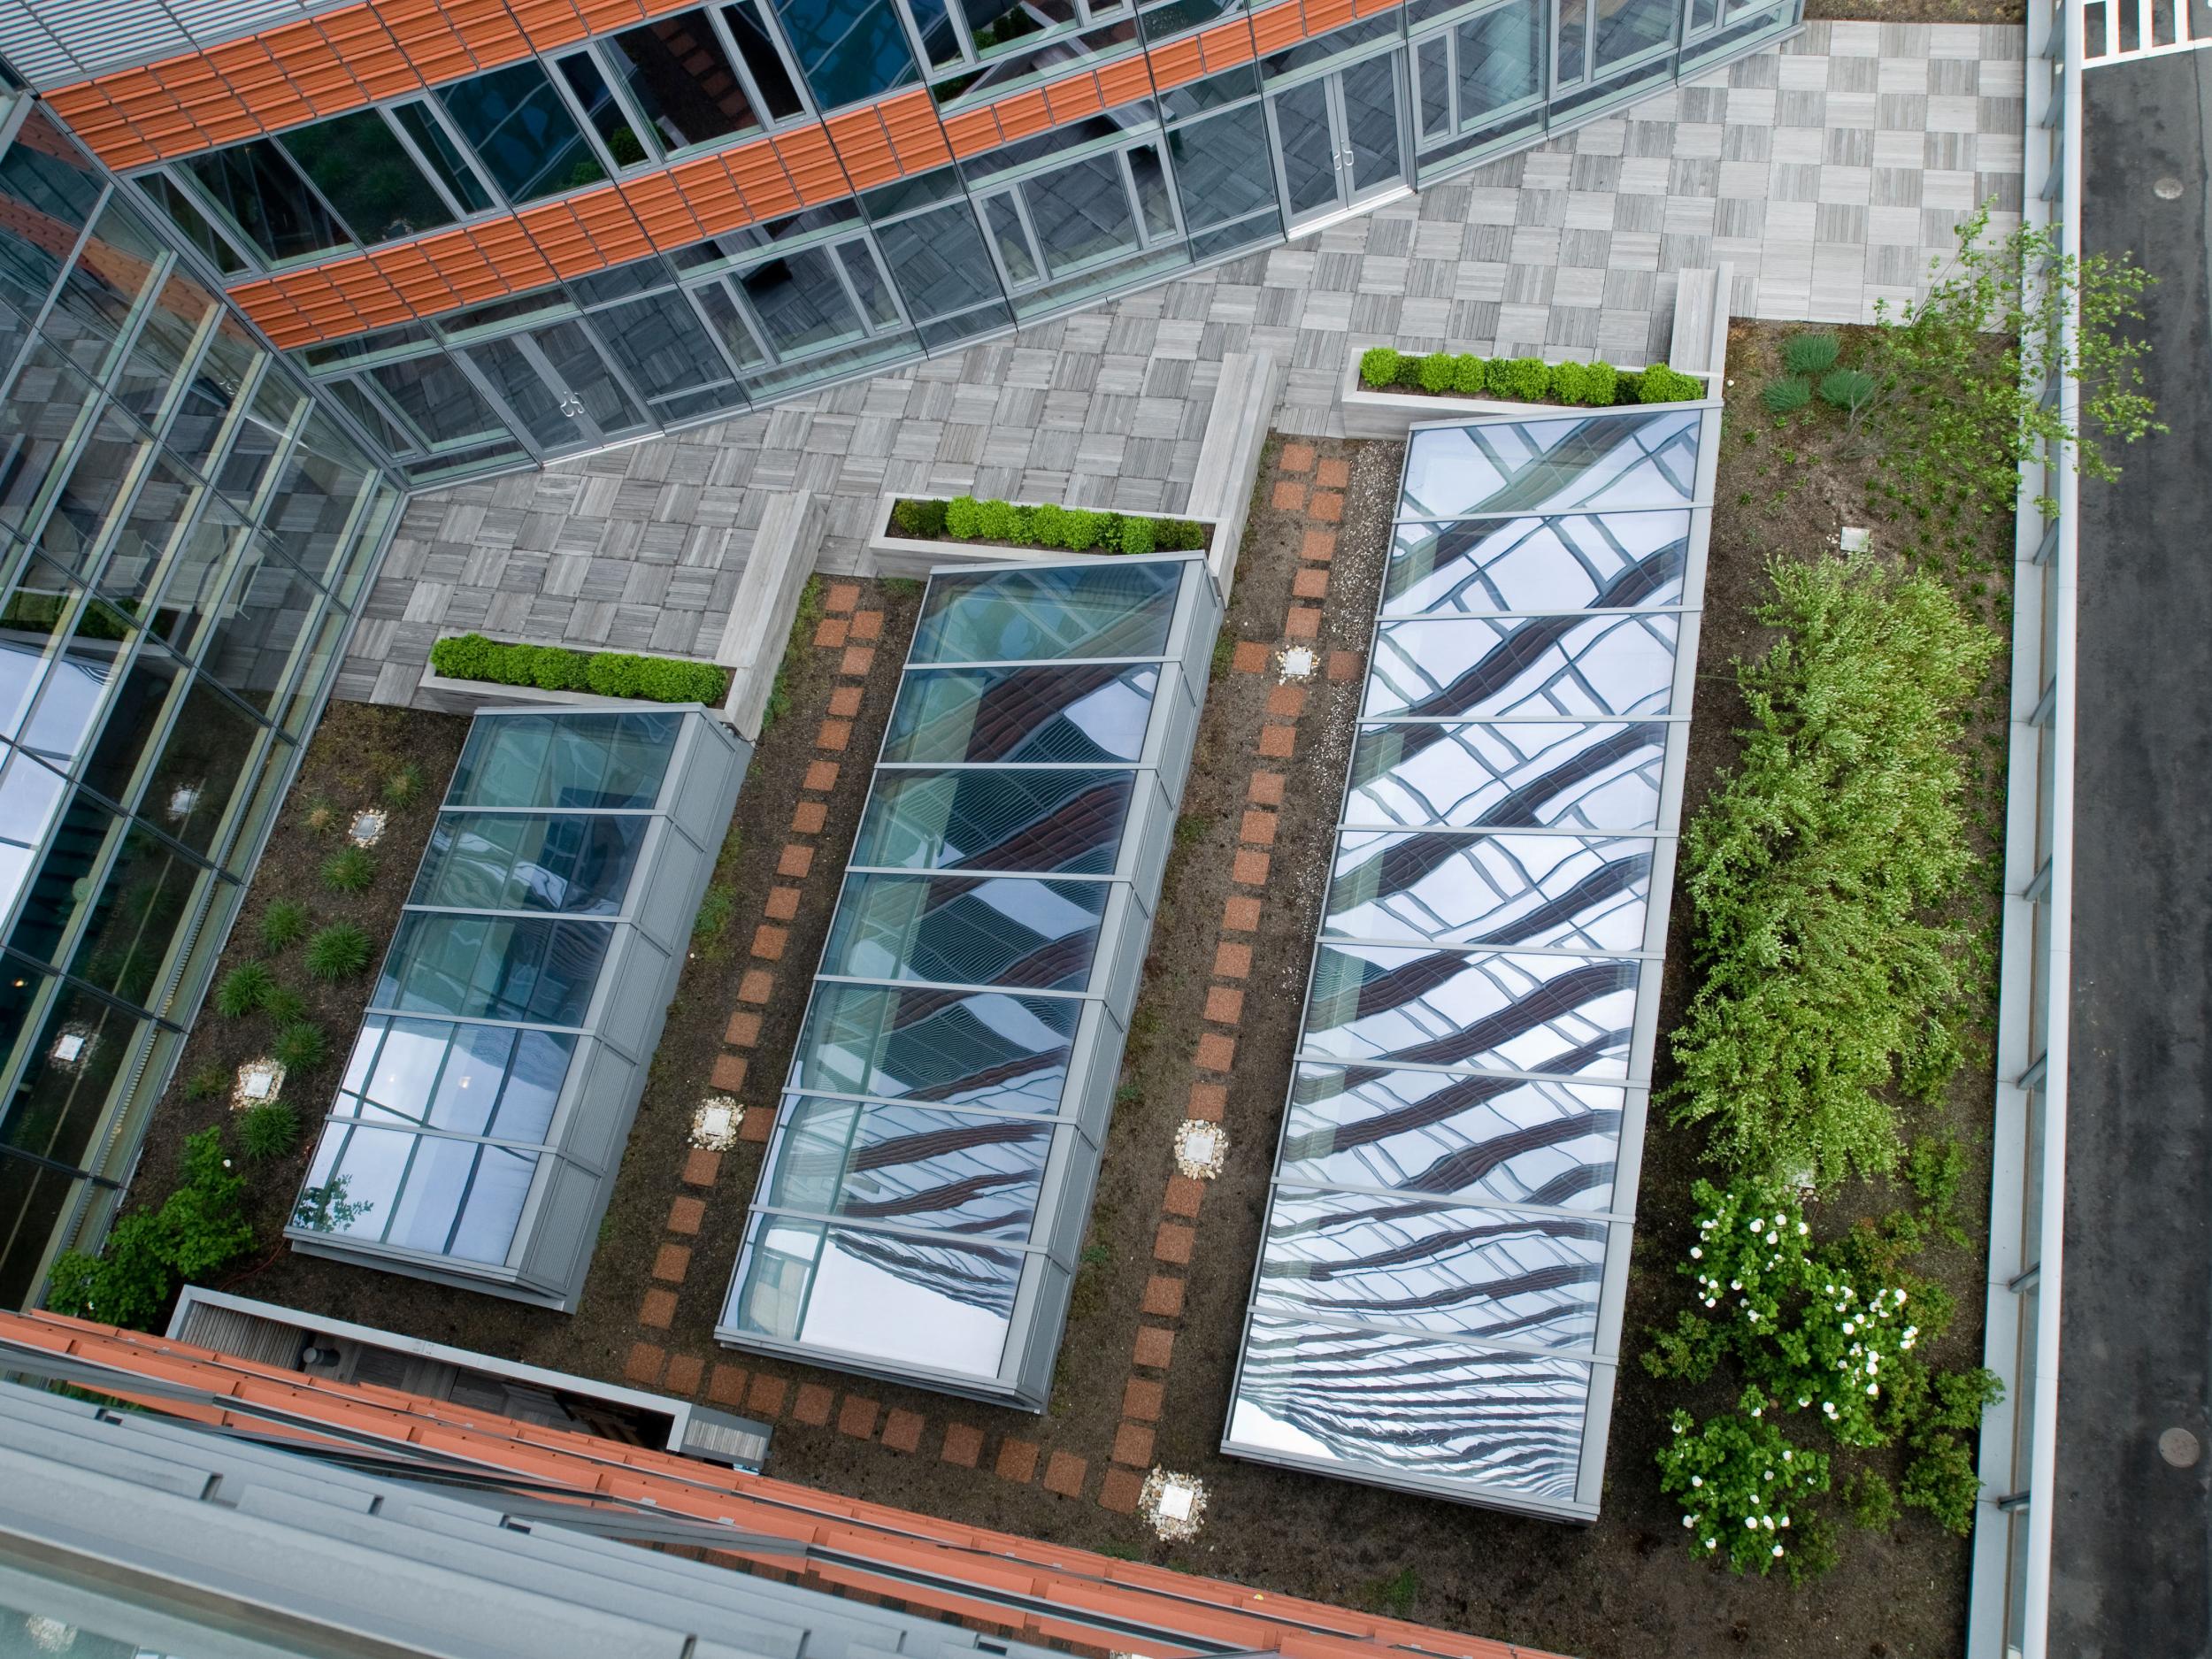 In the Melbourne local government area, 28 green roof and wall projects were under way in 2016